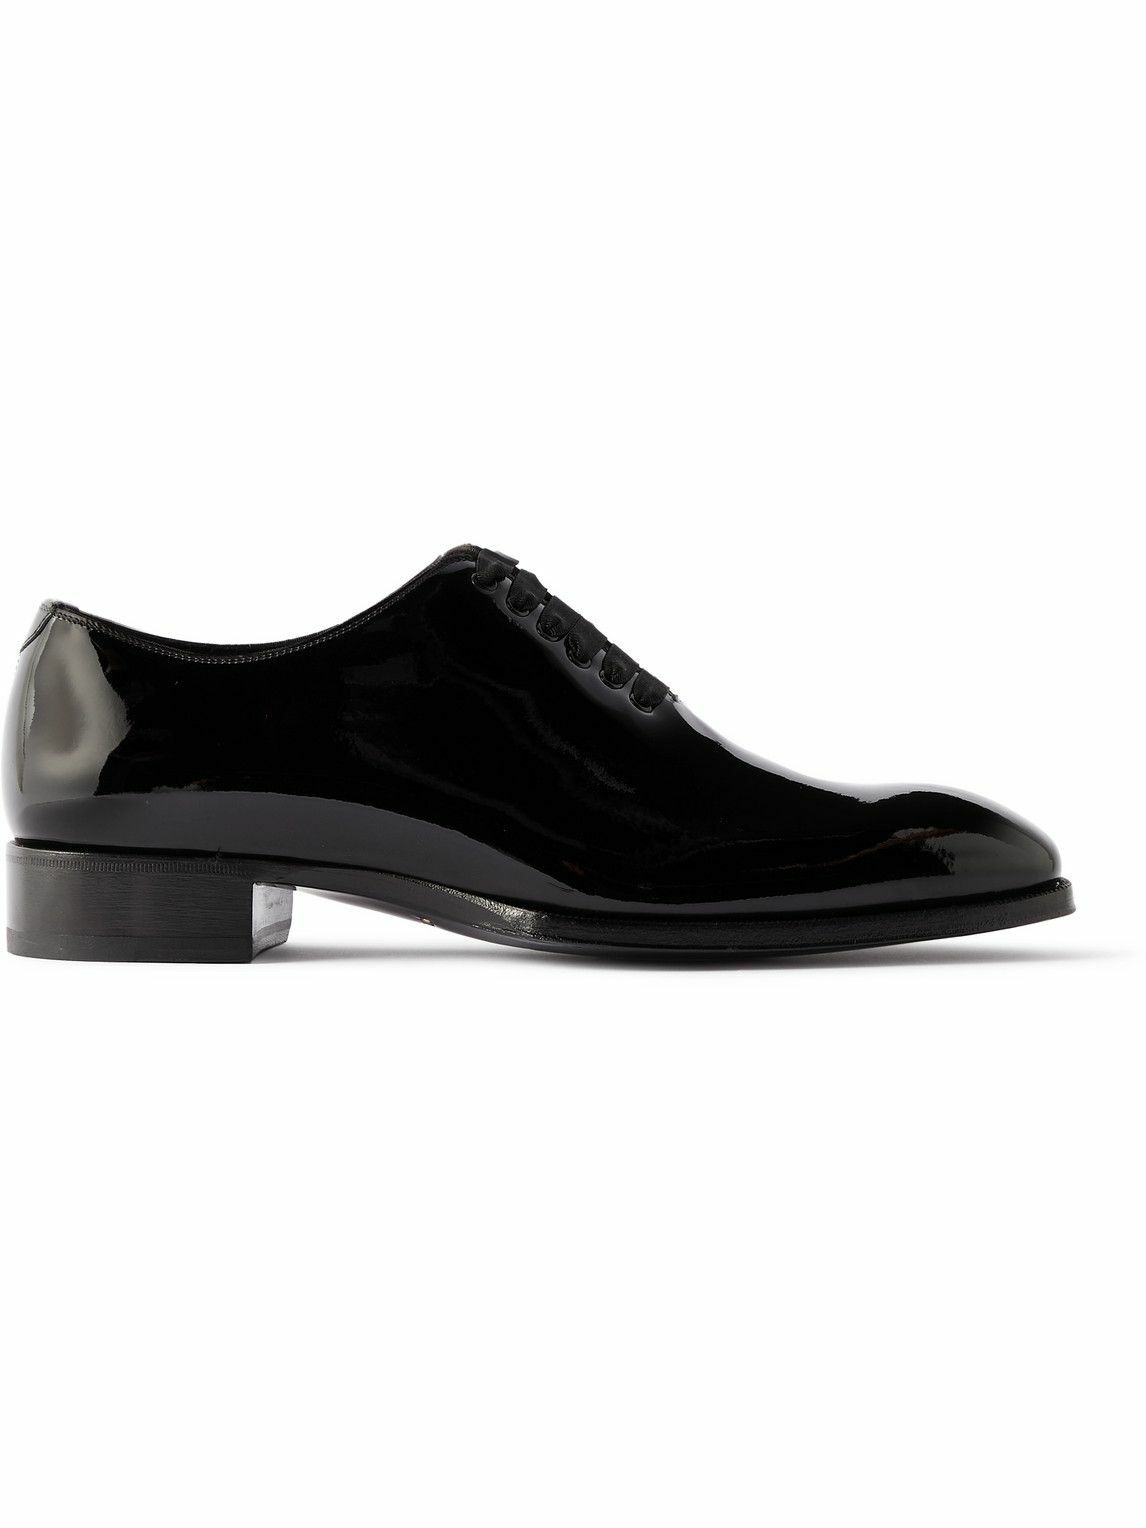 Photo: TOM FORD - Elkan Whole-Cut Patent-Leather Oxford Shoes - Black